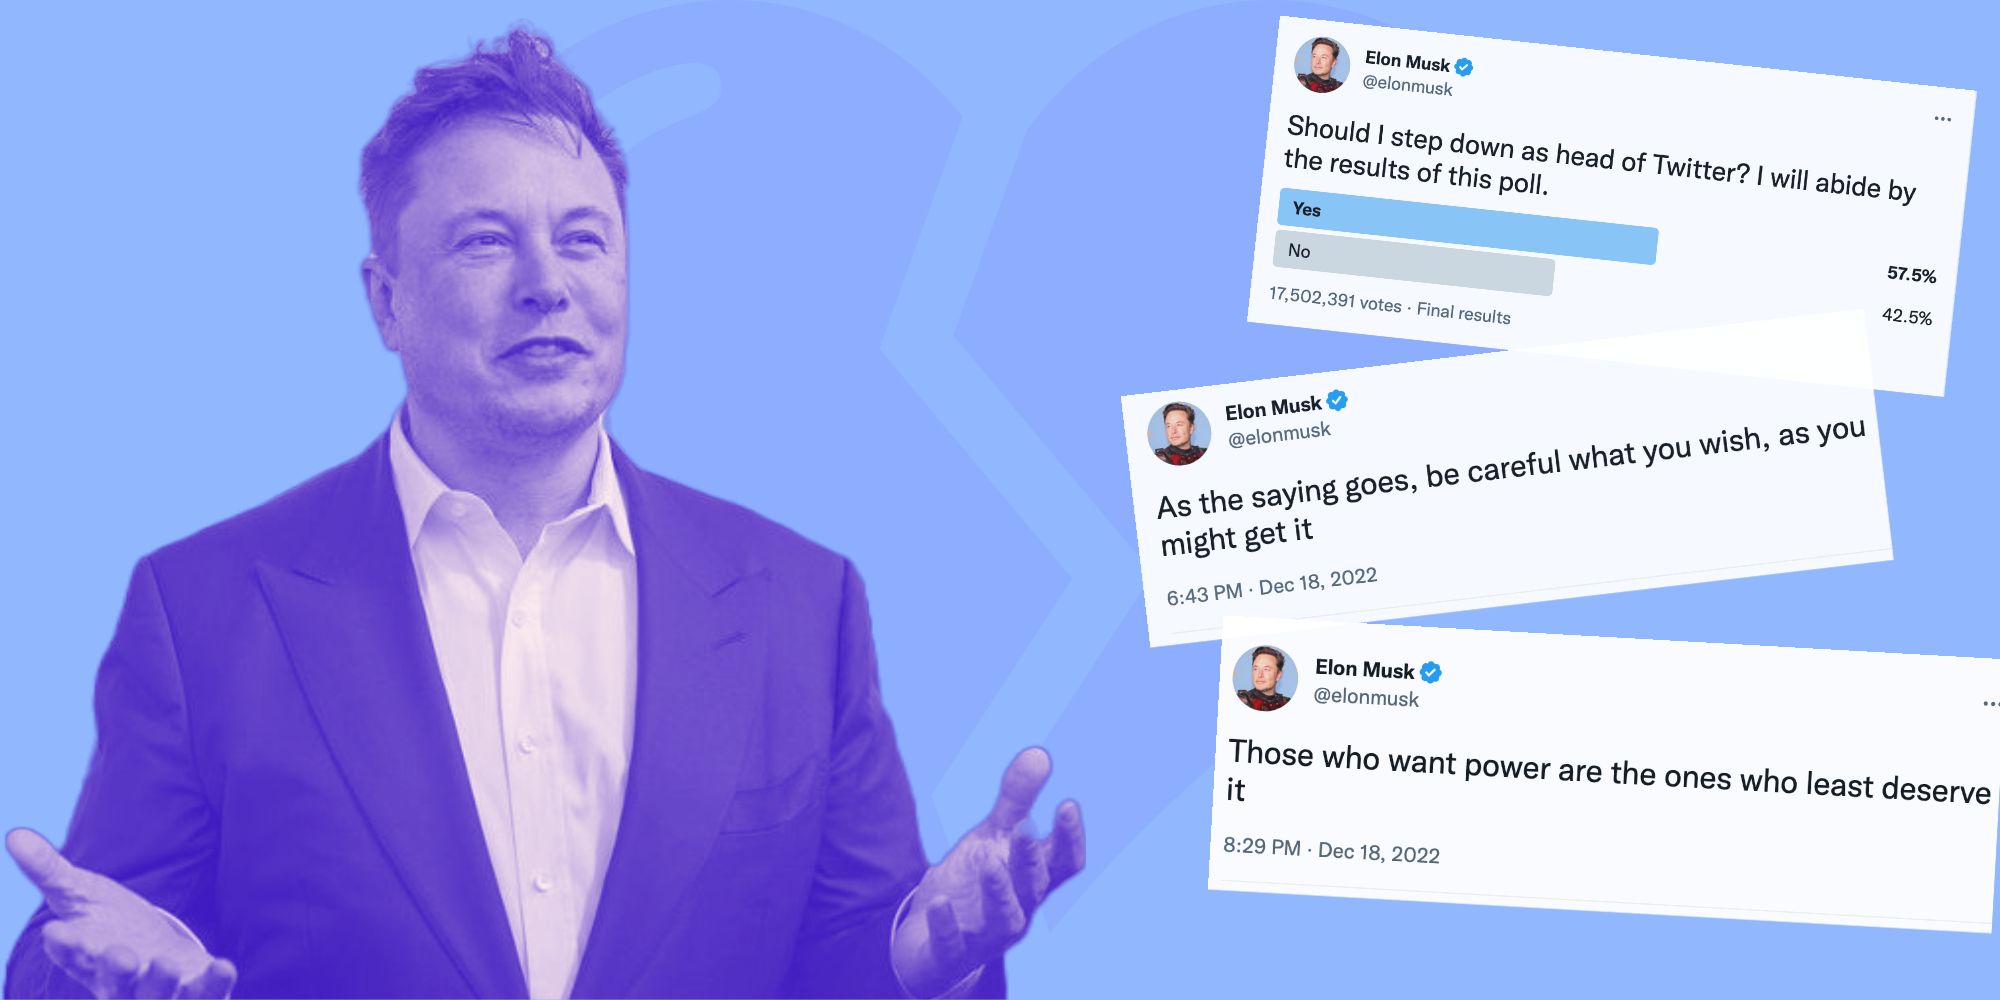 A photo of Elon Musk with his hands in front of him looking up in confusion, with a blue tint, along with three screenshots of tweets.  A broken heart emoji is faintly displayed on the blue background